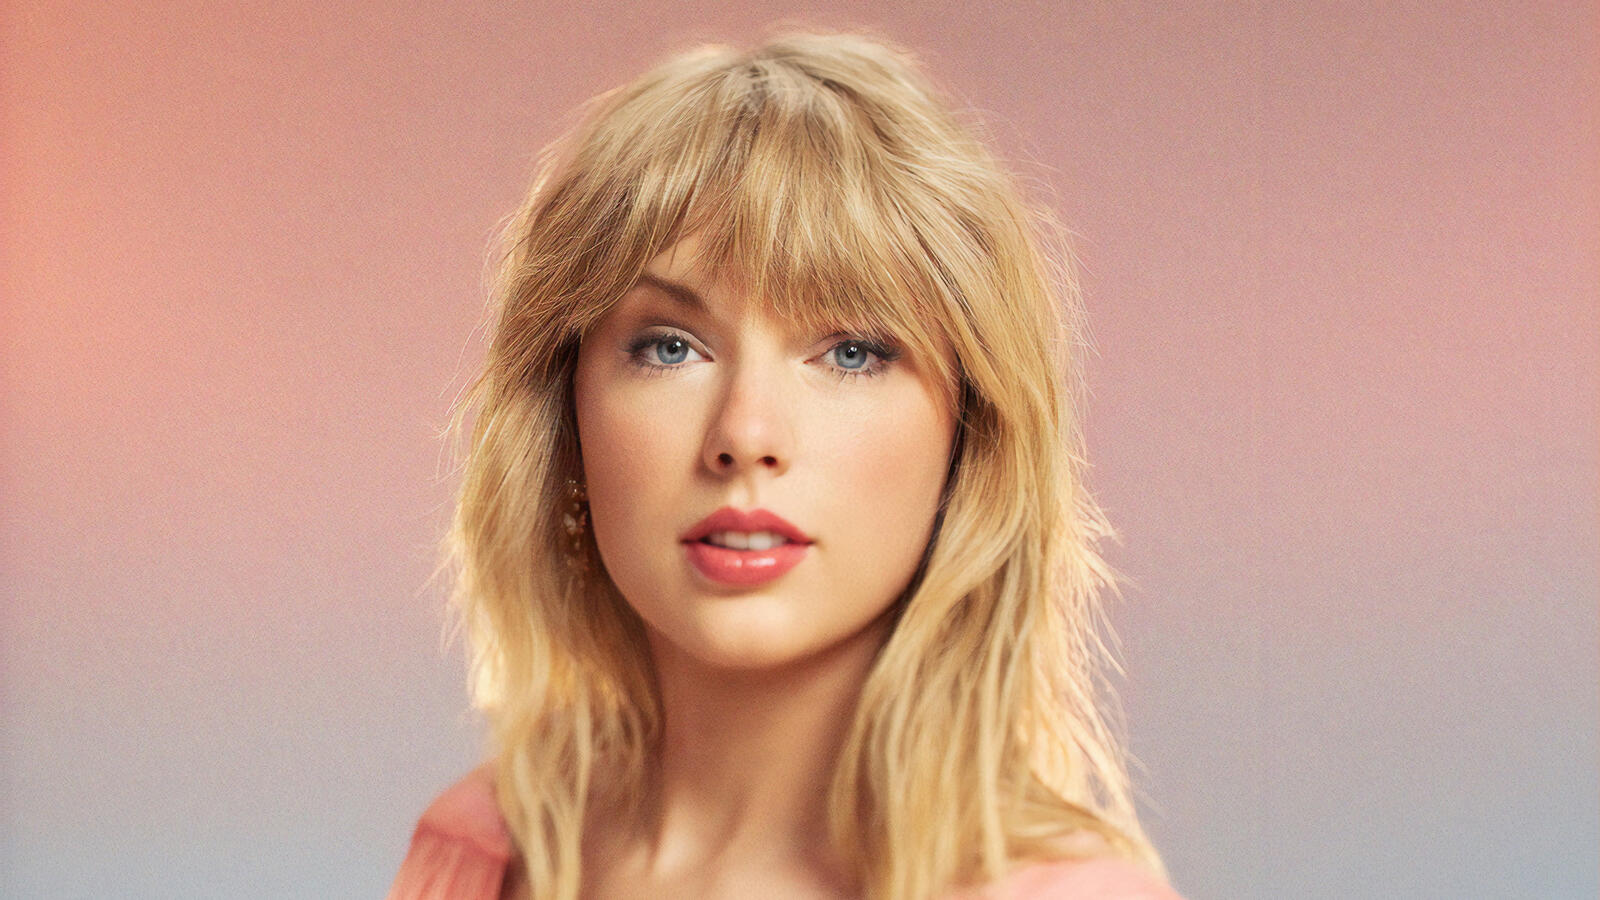 Free photo Portrait of Taylor Swift on a simple background